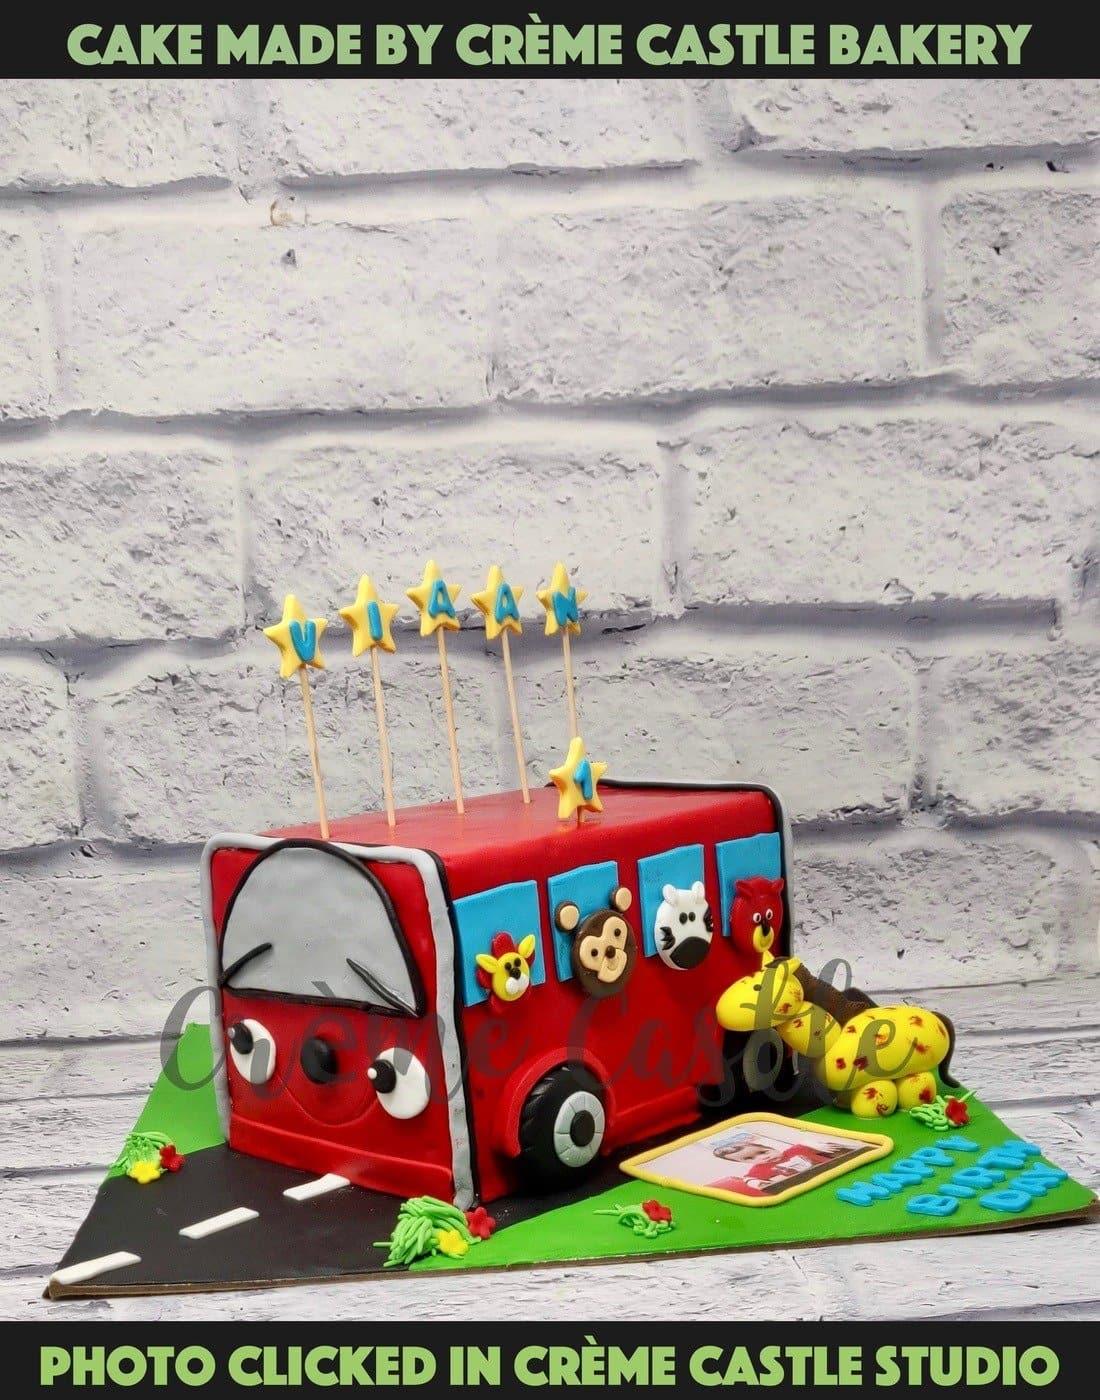 The Wheels on the Bus - Cakes by Robin